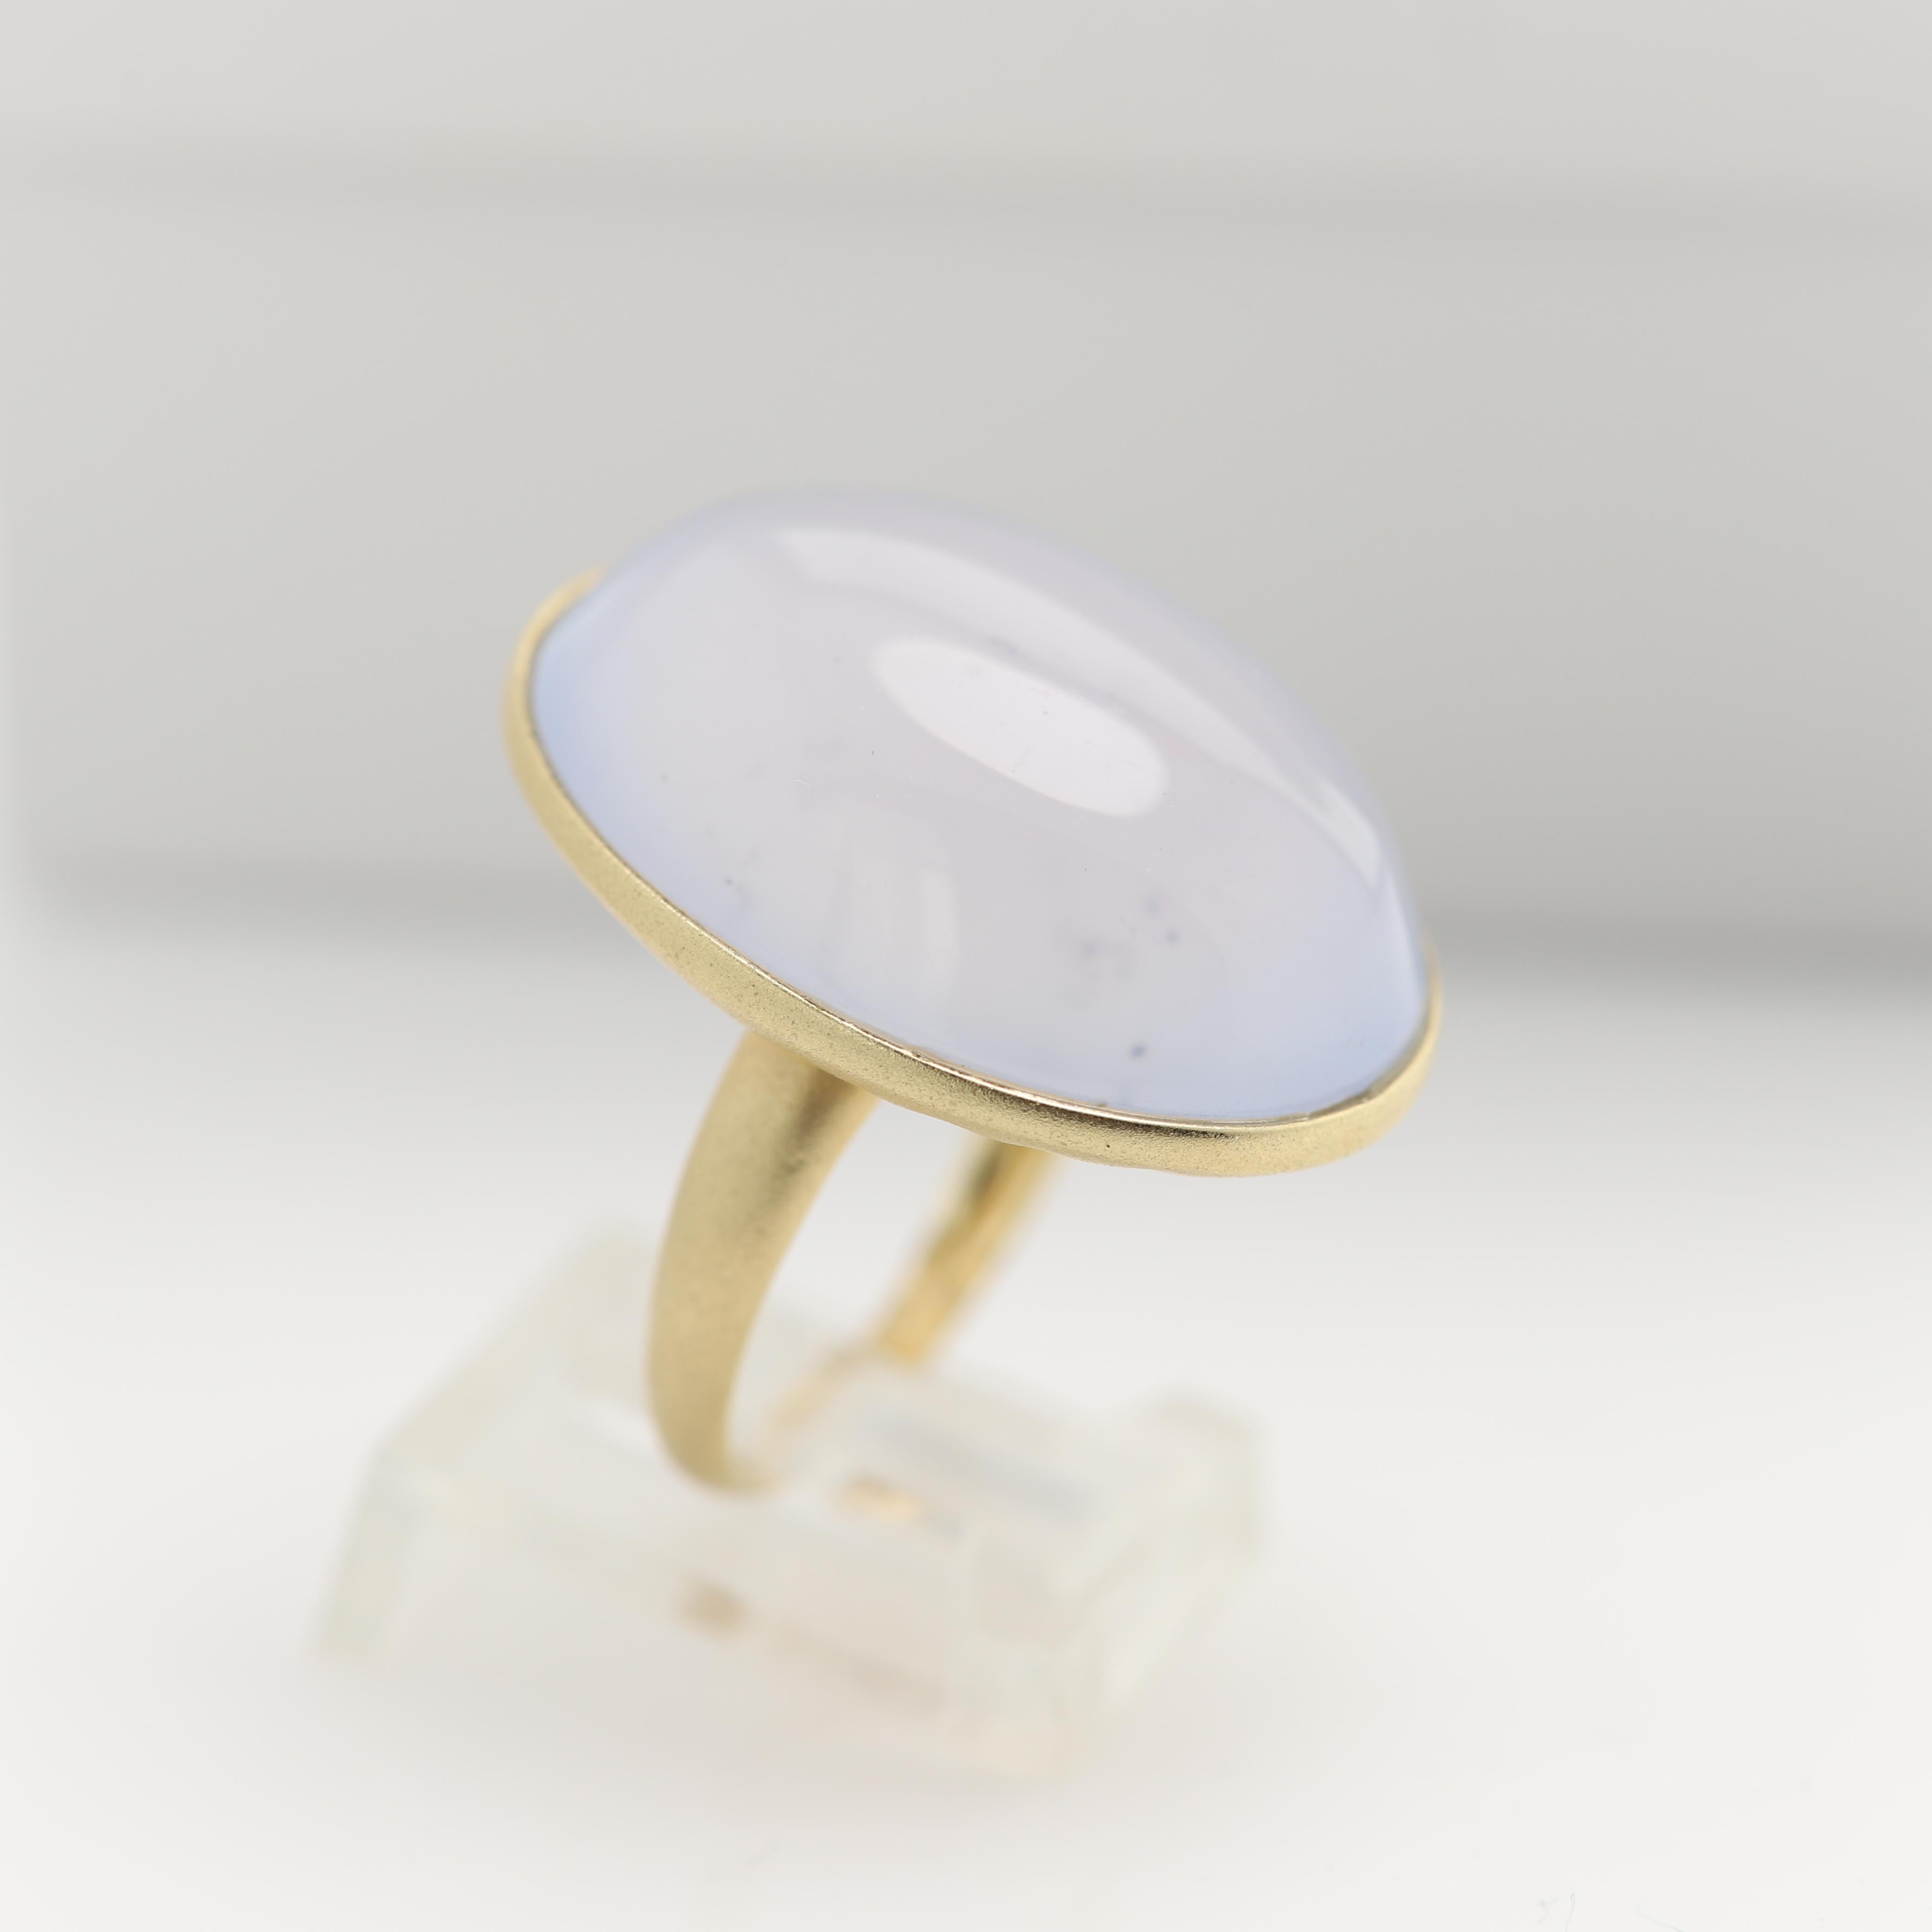 NEW 
Vintage Chalcedony Oval Cabuchon Cocktail  Ring - Hand Made in Italy
14k Yellow Gold 10 grams - mat finish (not shiney gold)
Cabochon Oval shape Dome  approx size 28 x 20 mm / 25 carat
Finger size 8
stone is natural - Imperfections due exist